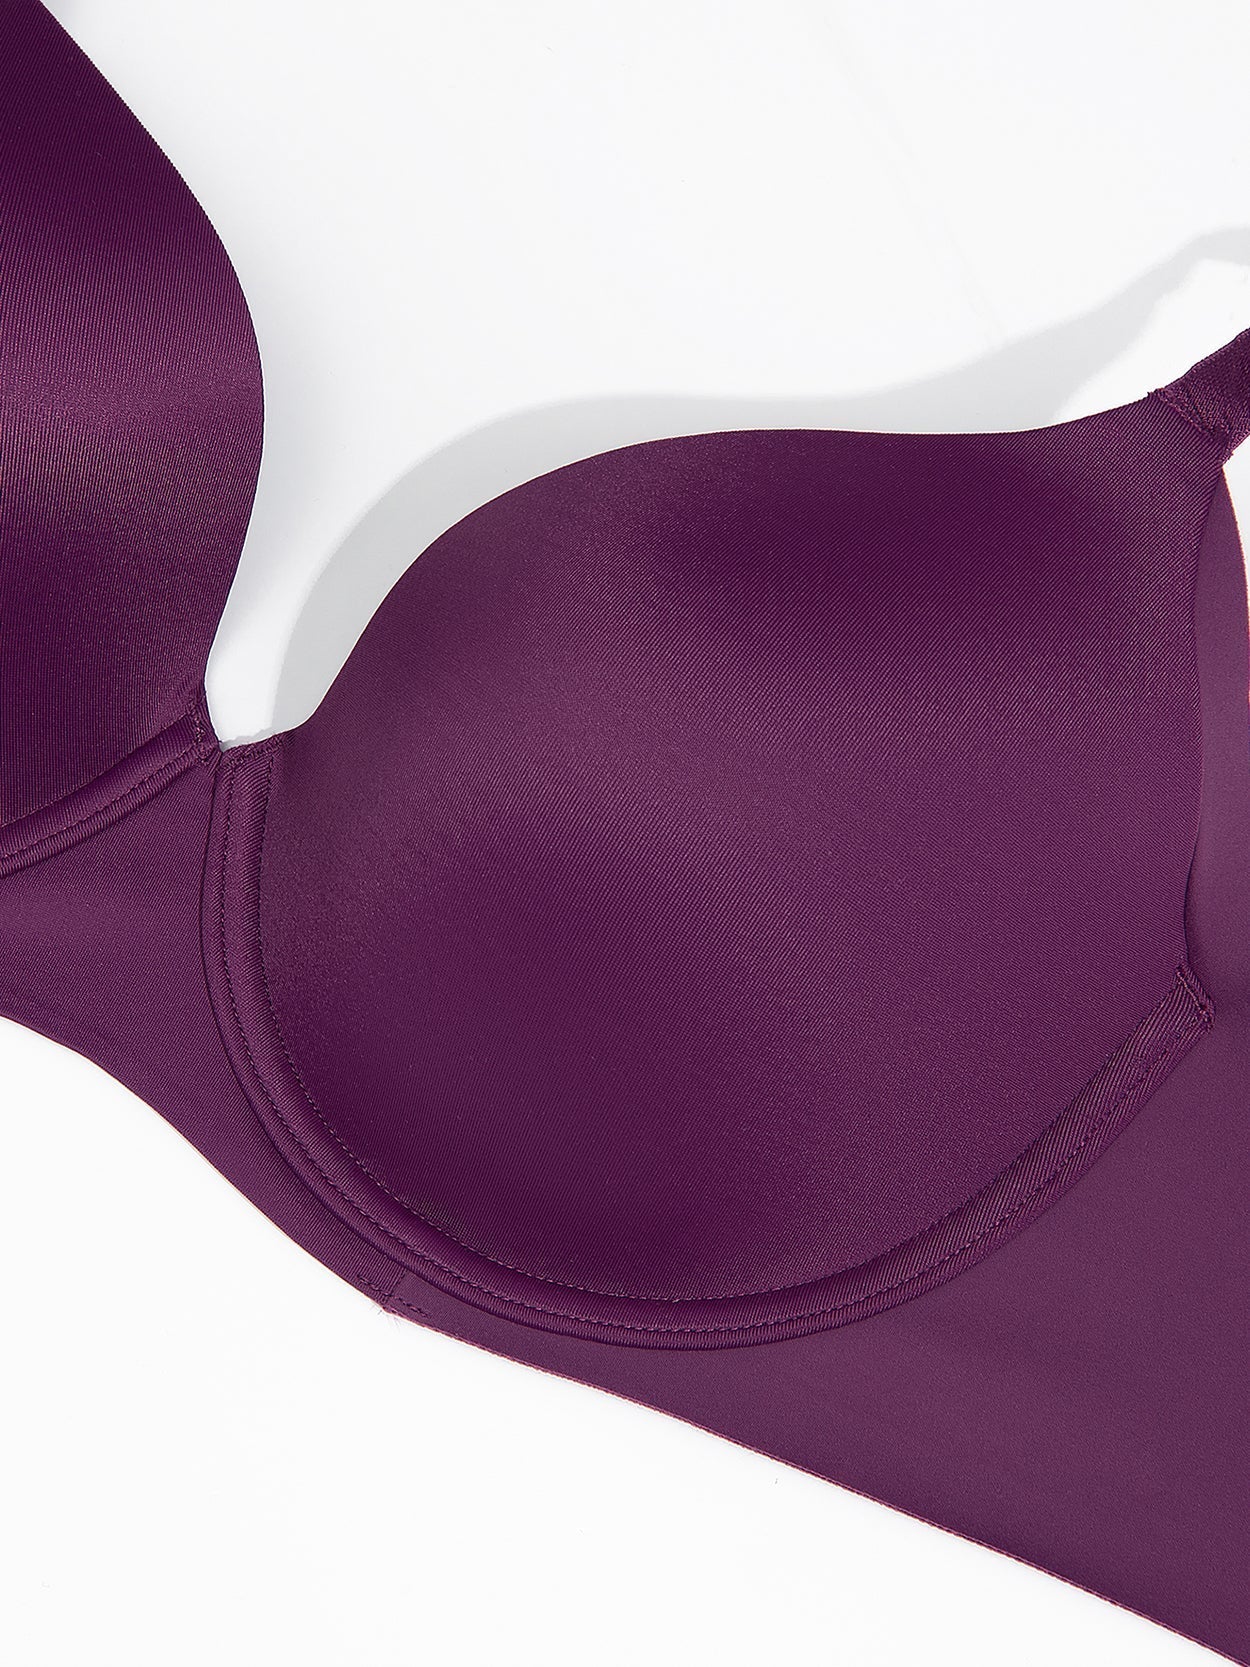 Strapless Bra Underwire Multiway Molded Cup Purple